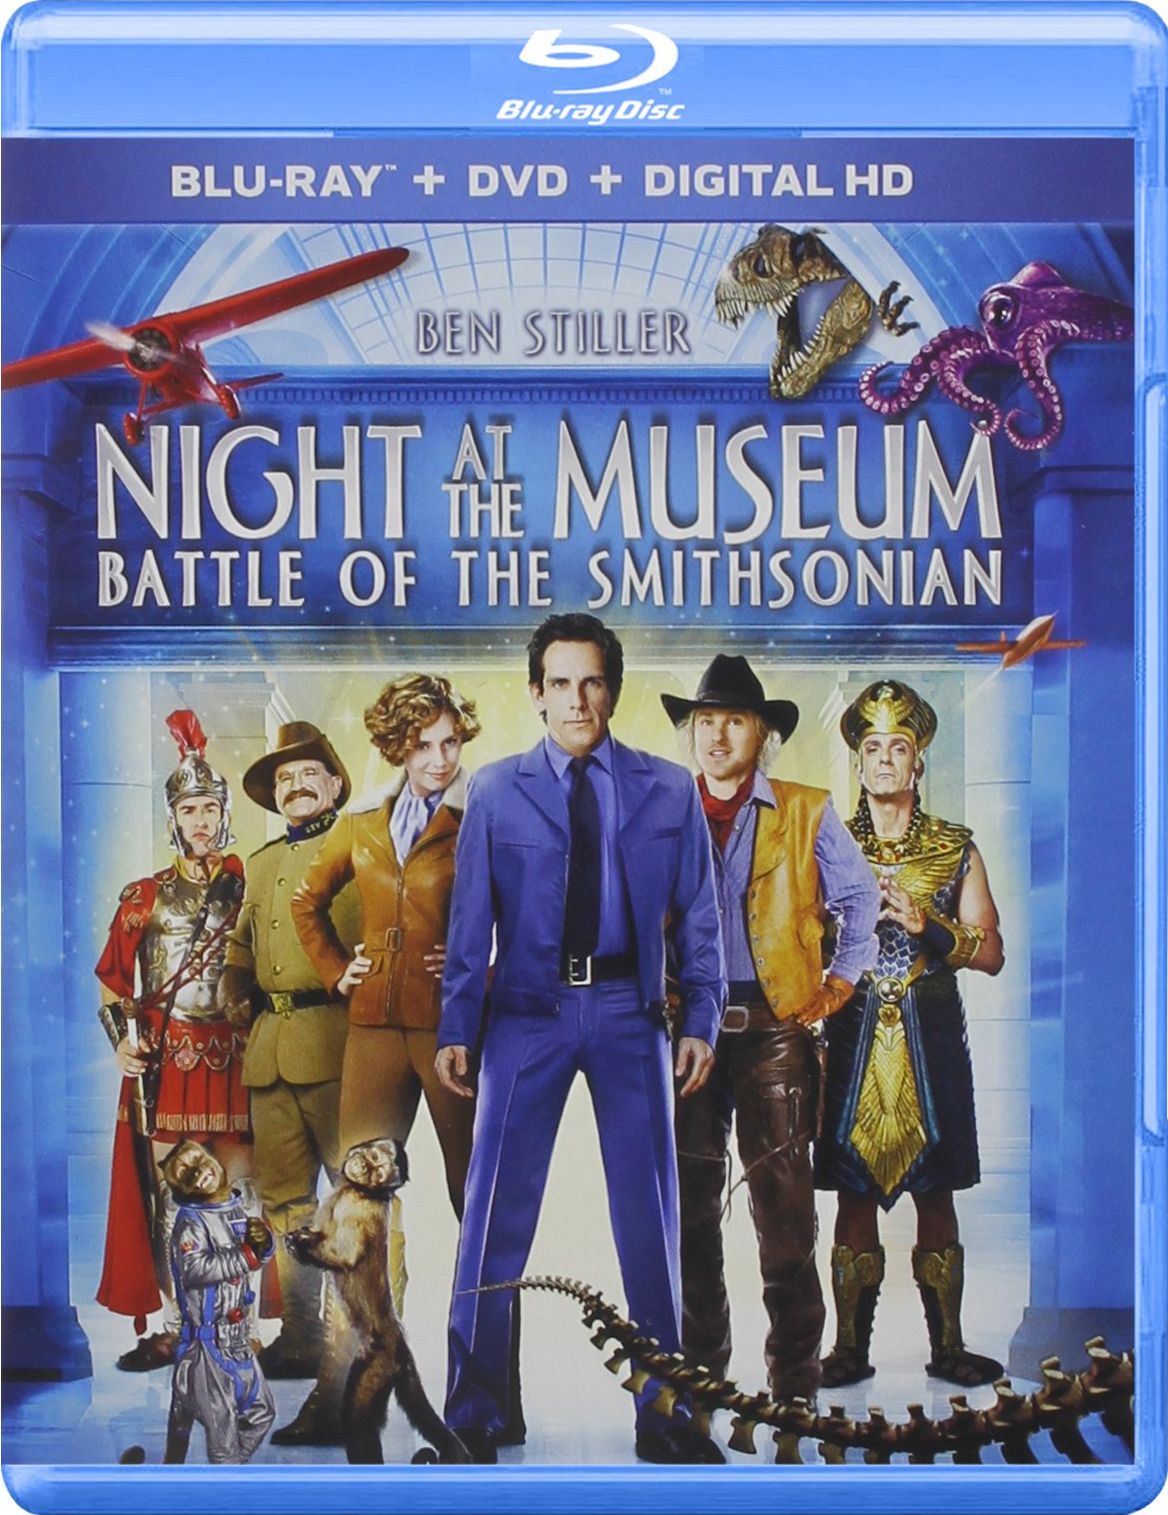 Night at the Museum: Battle of the Smithsonian DVD Release Date December 1, 20091168 x 1515